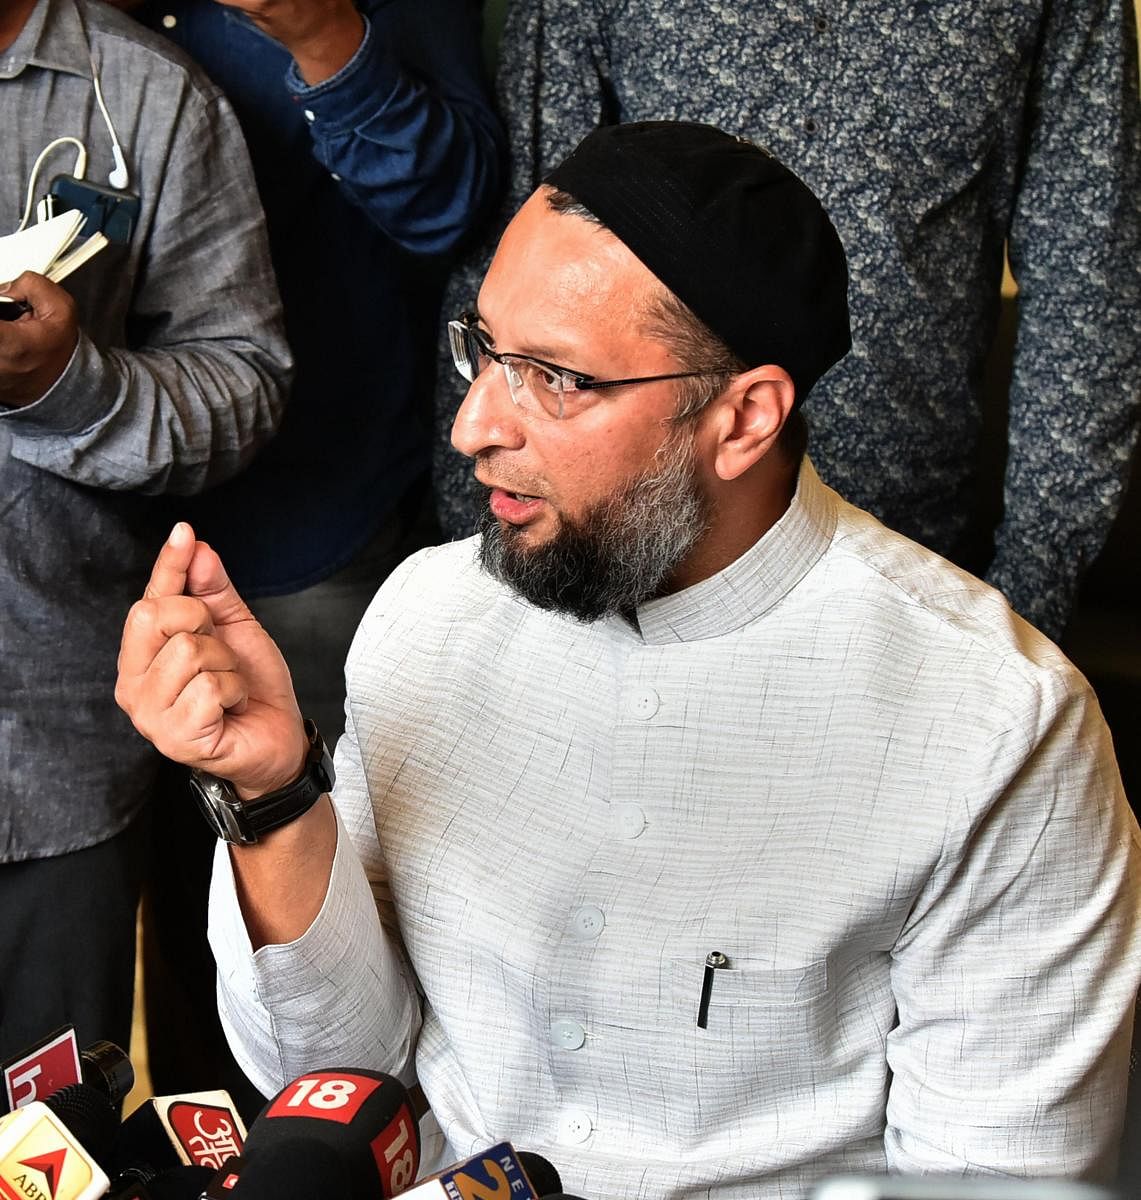 All India Majlis-e-Ittehadul Muslimeen (AIMIM) chief Asaduddin Owaisi addresses the media after the Supreme Court's historic verdict on Ayodhya land case. (PTI PHOTO)